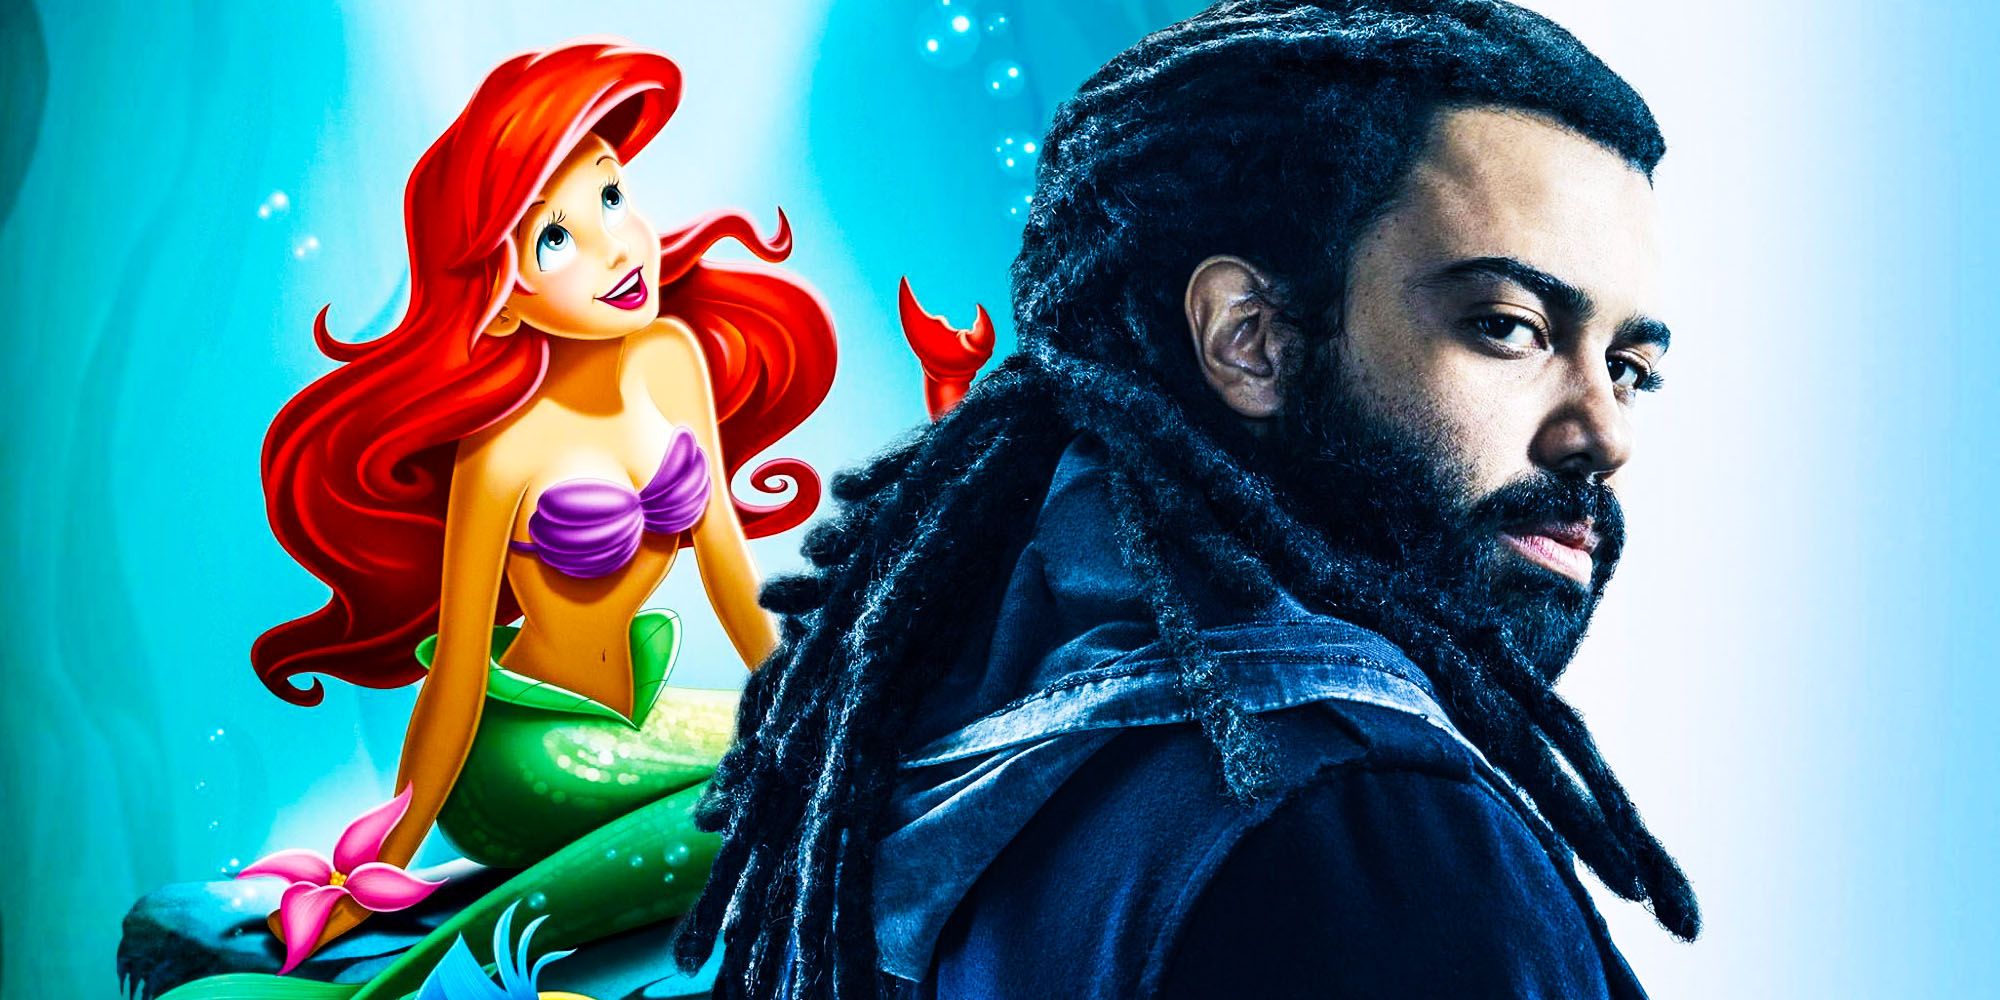 Daveed Diggs Little Mermaid Tease Makes Disneys Remake Even More Exciting